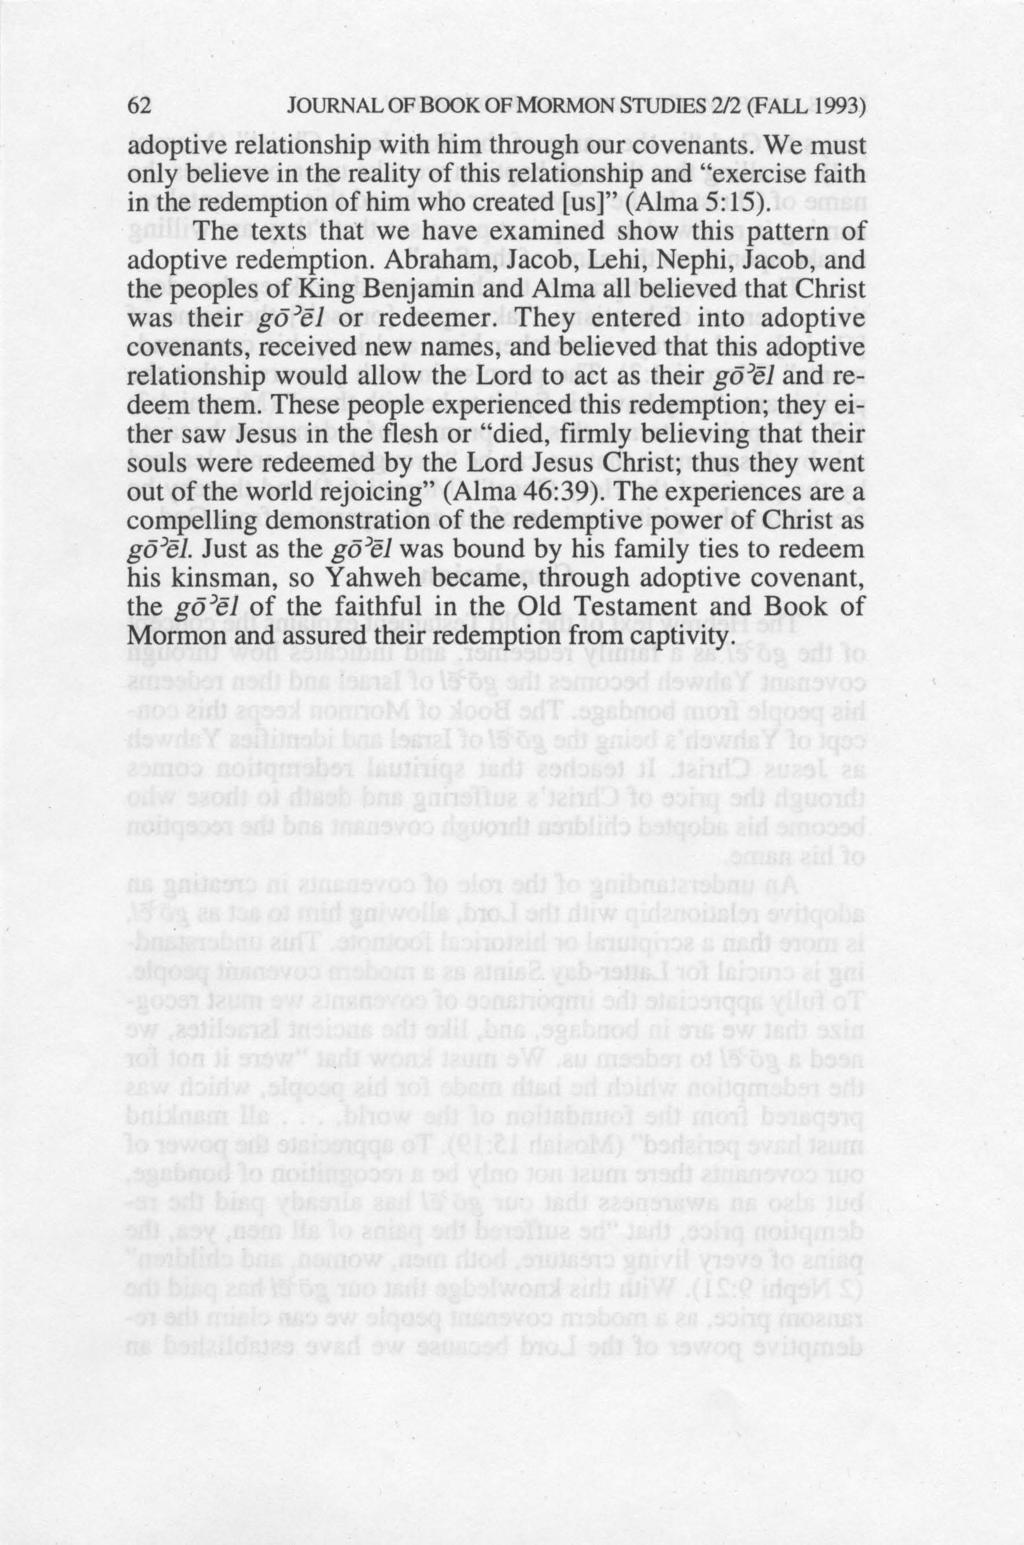 62 JOURNAL OF BOOK OF MORMON STUDIES 212 (FALL 1993) adoptive relationship with him through our covenants.